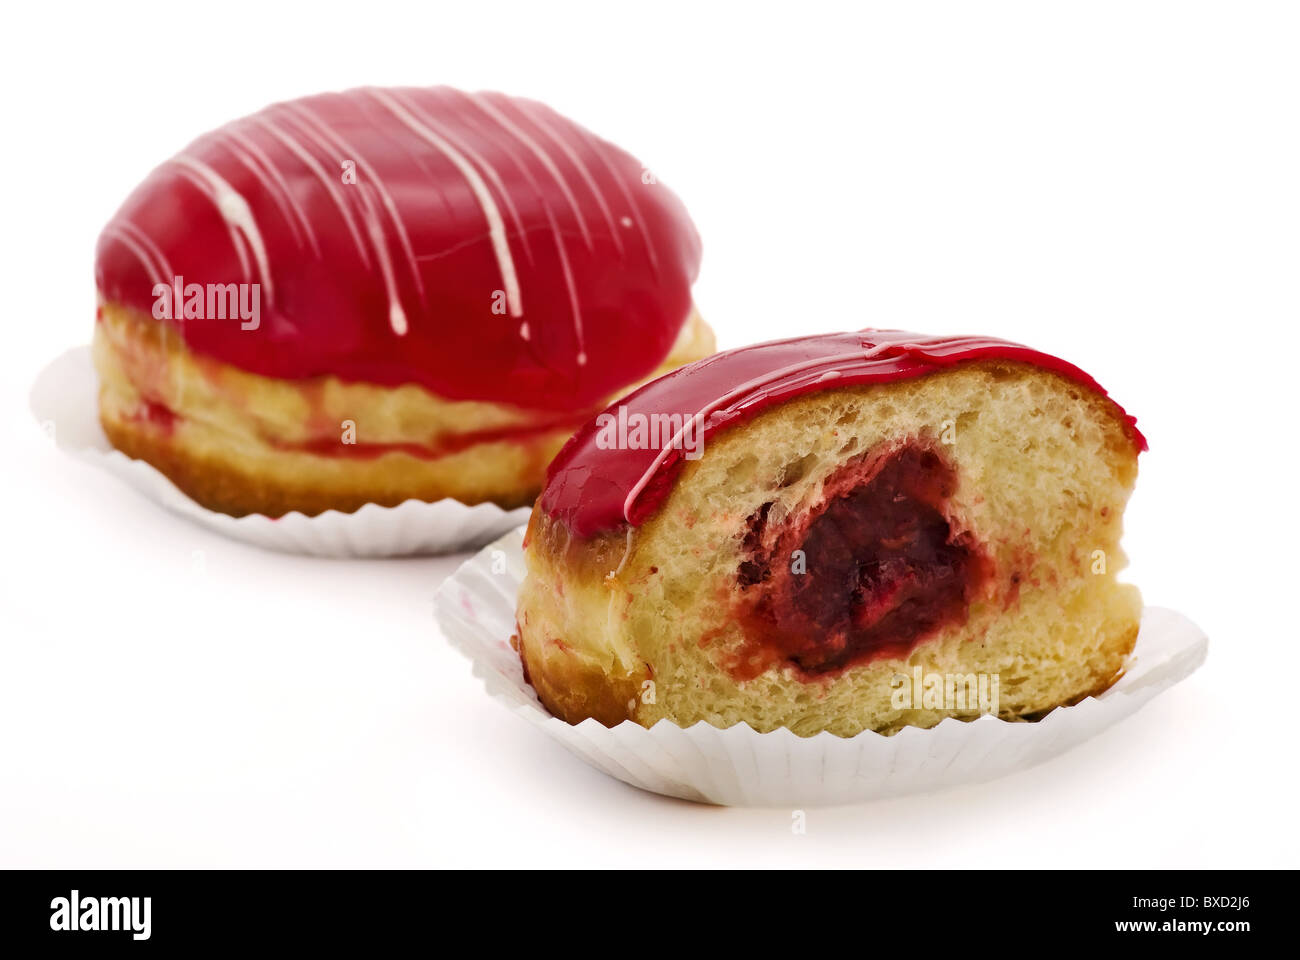 red donut Stock Photo